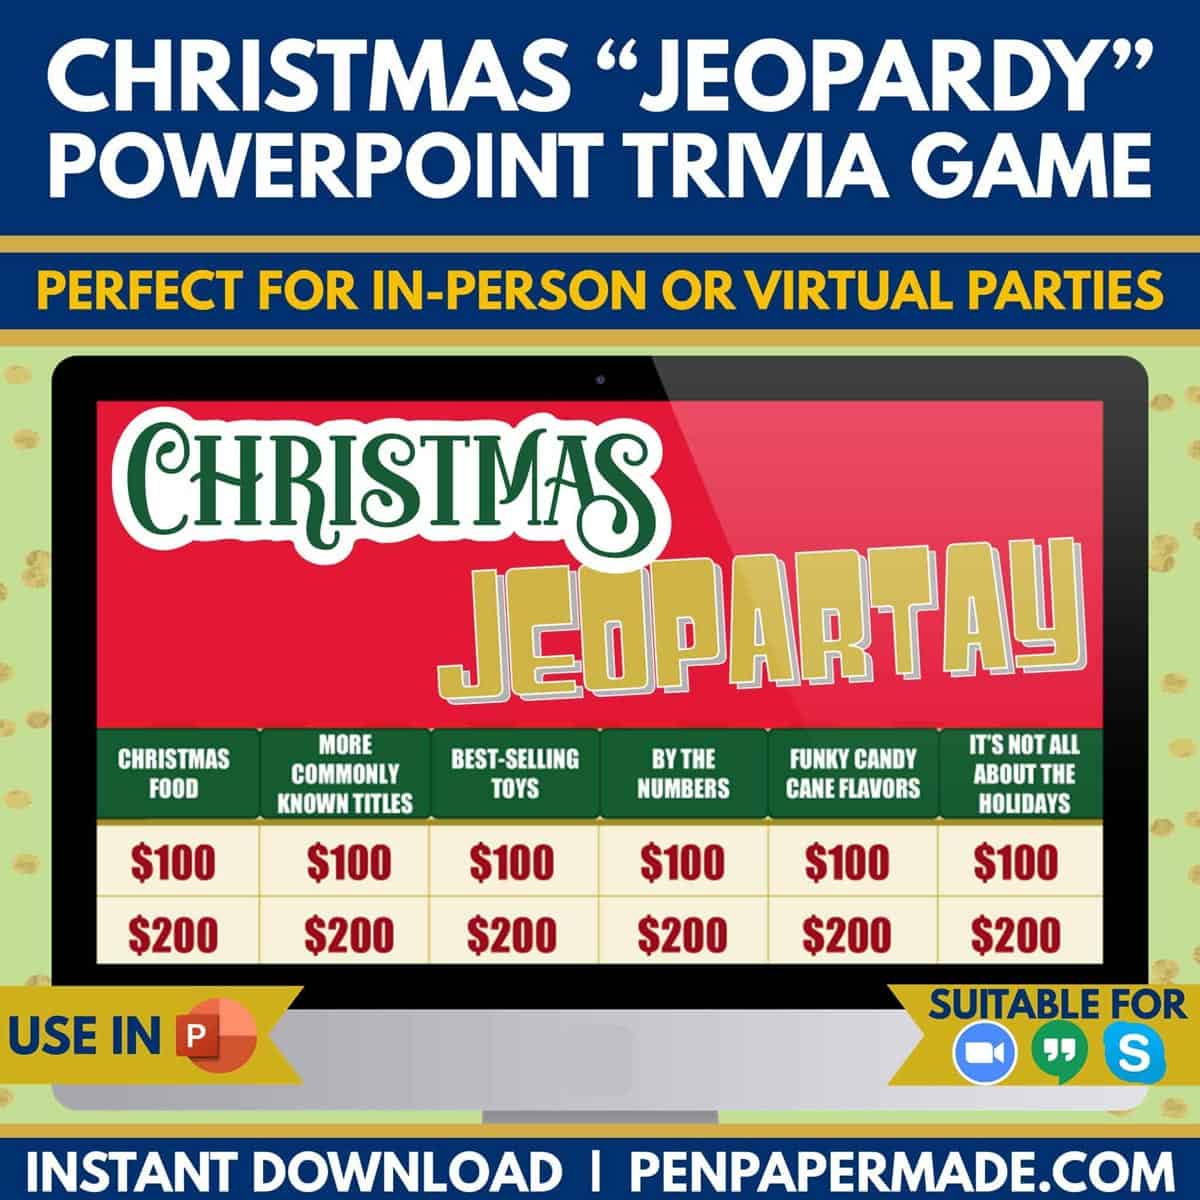 classic christmas jeopardy powerpoint title and game categories.